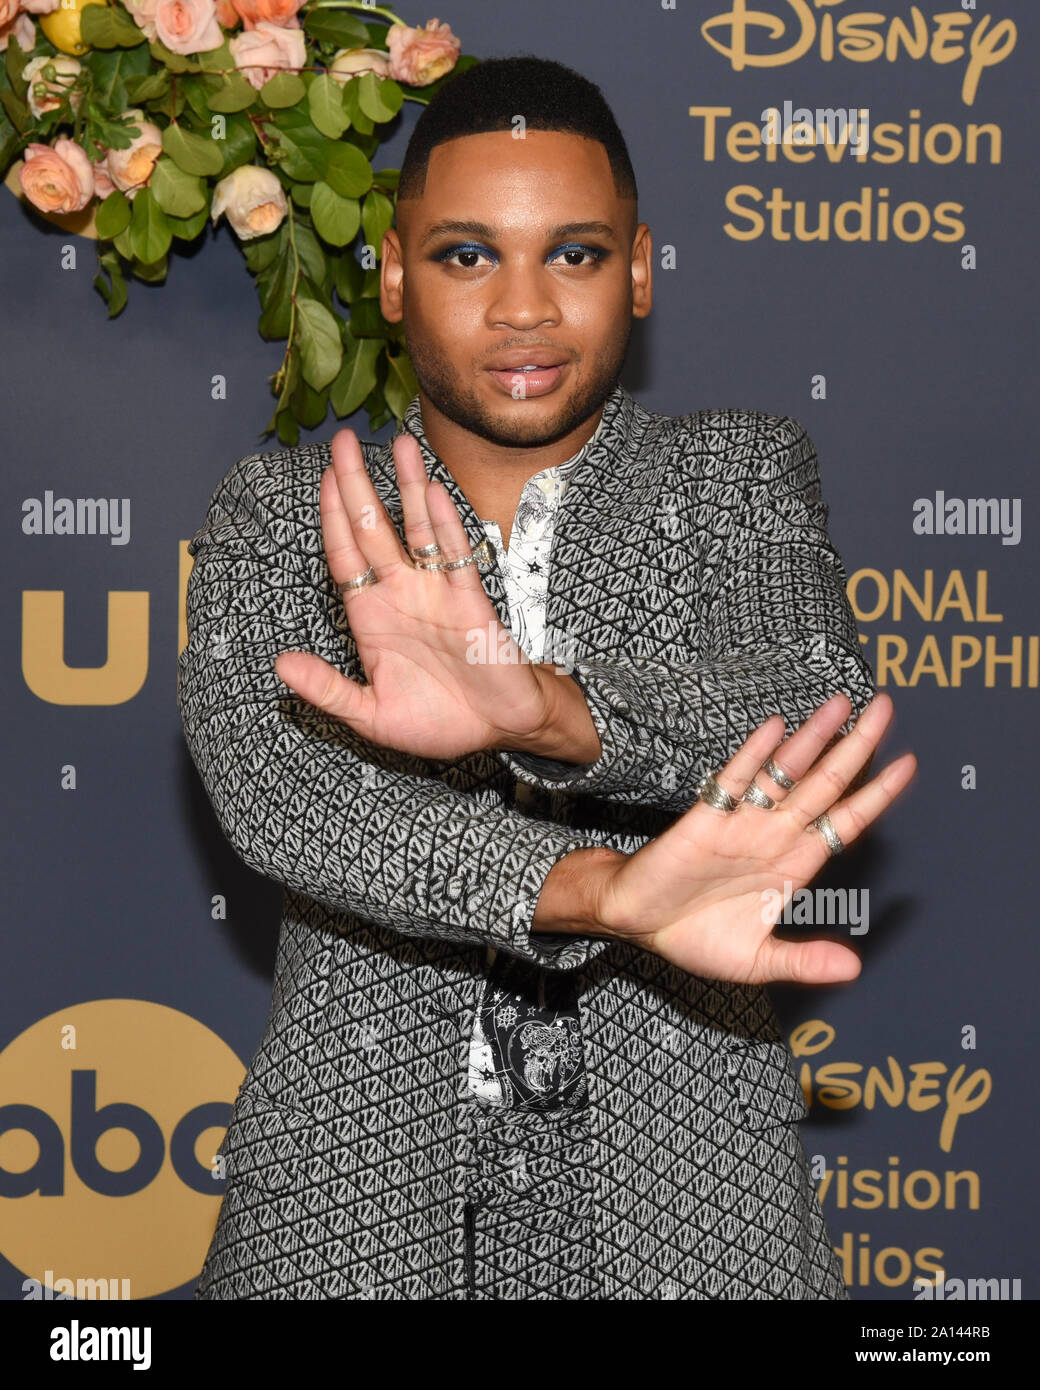 September 22 2019 Los Angeles California Usa 22 September 2019 Los Angeles California Ryan Jamaal Swain Walt Disney Television 2019 Emmy Award Post Party For Abc Disney Television Studios Fx